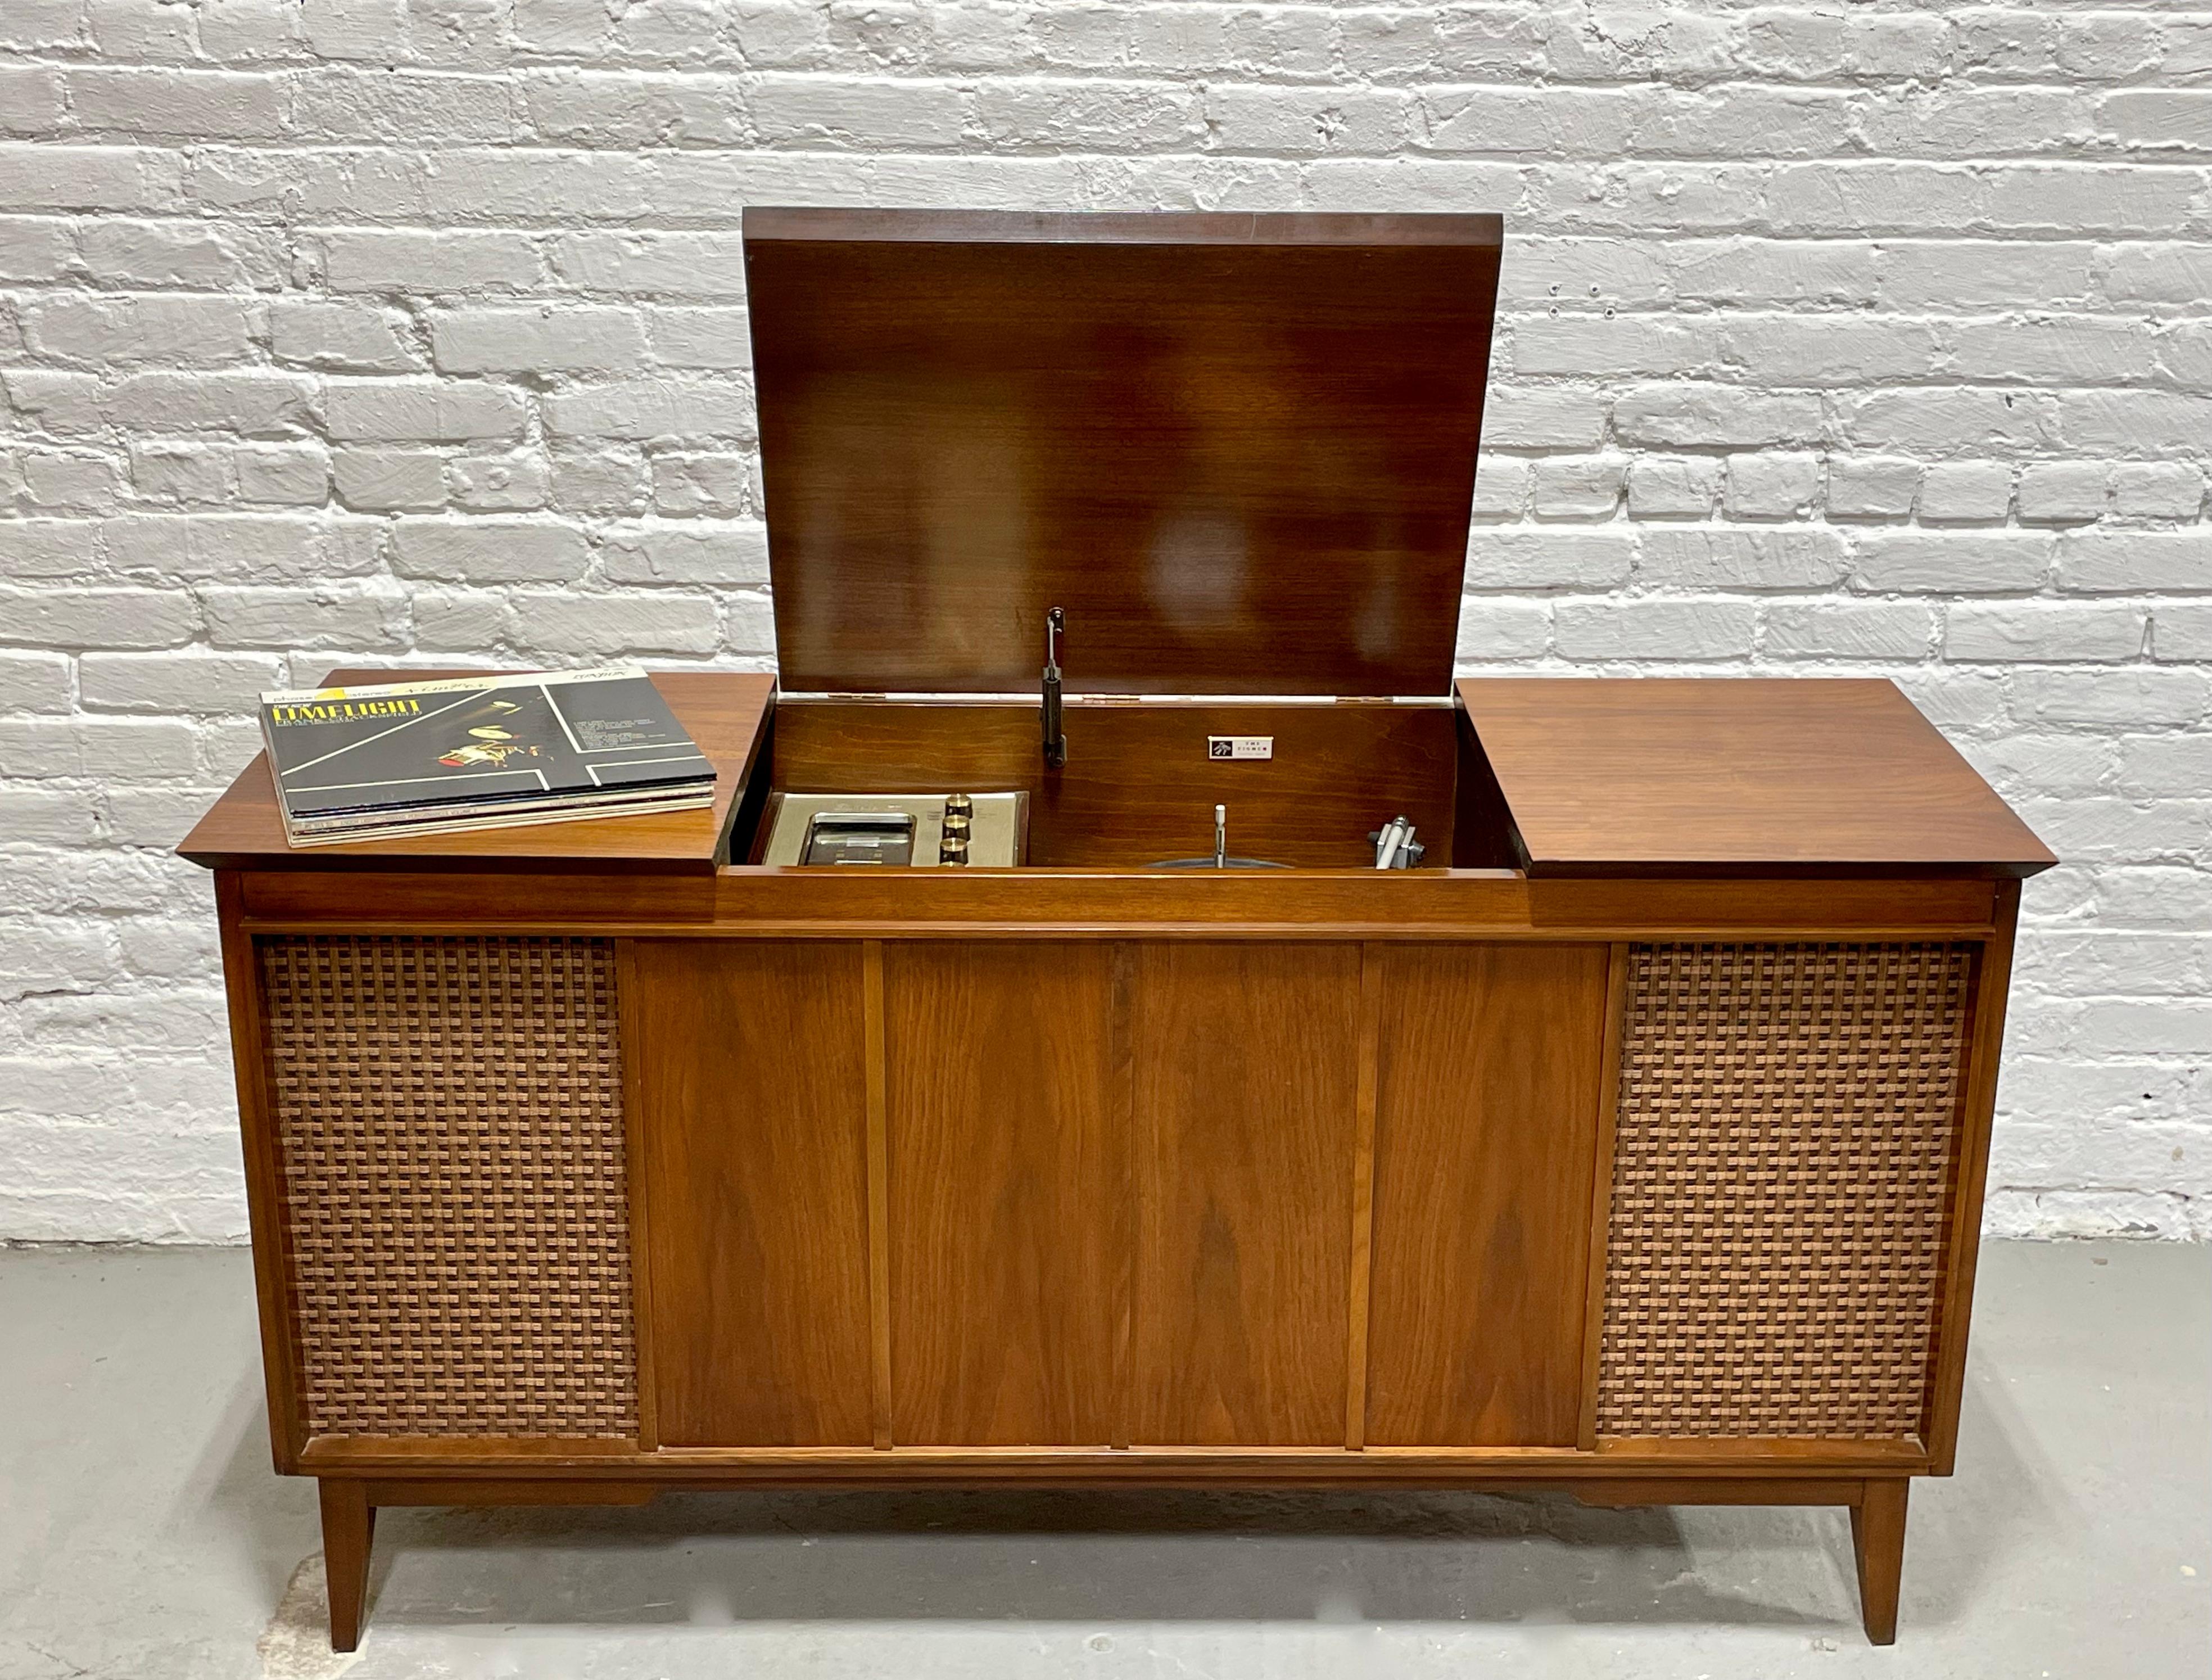 rca stereo console models